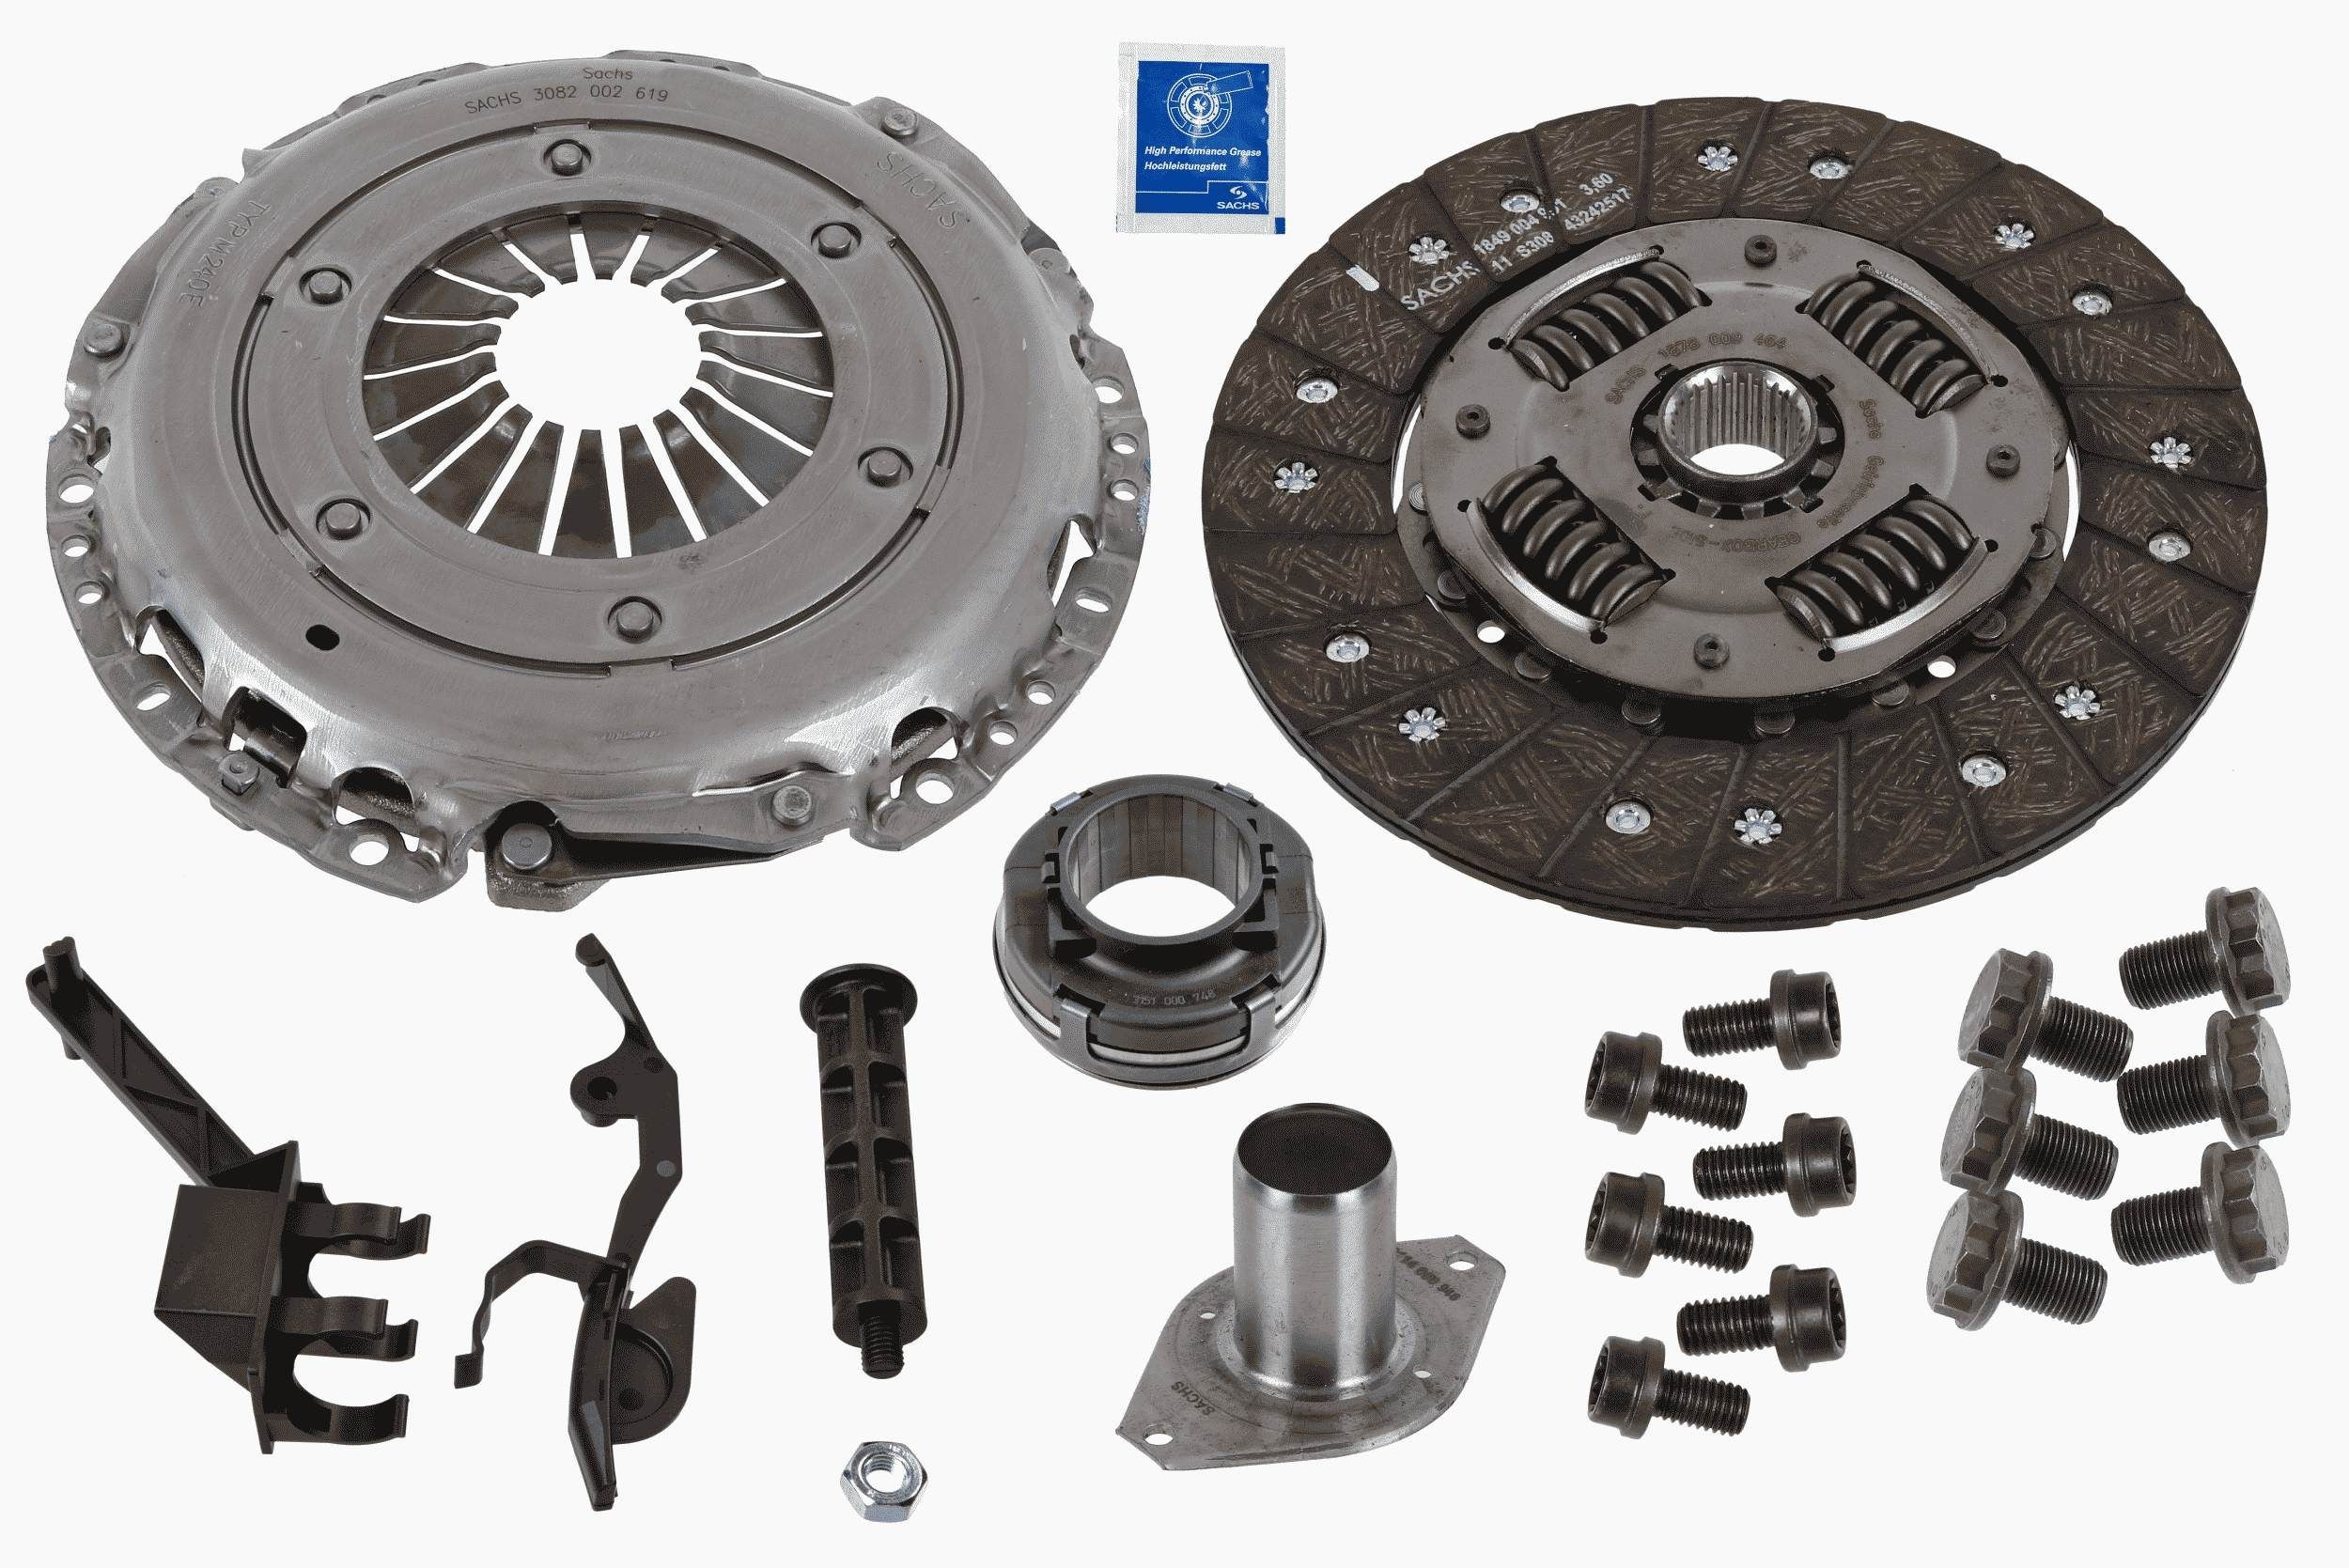 SACHS 3000 970 150 Audi A6 2017 Complete clutch kit